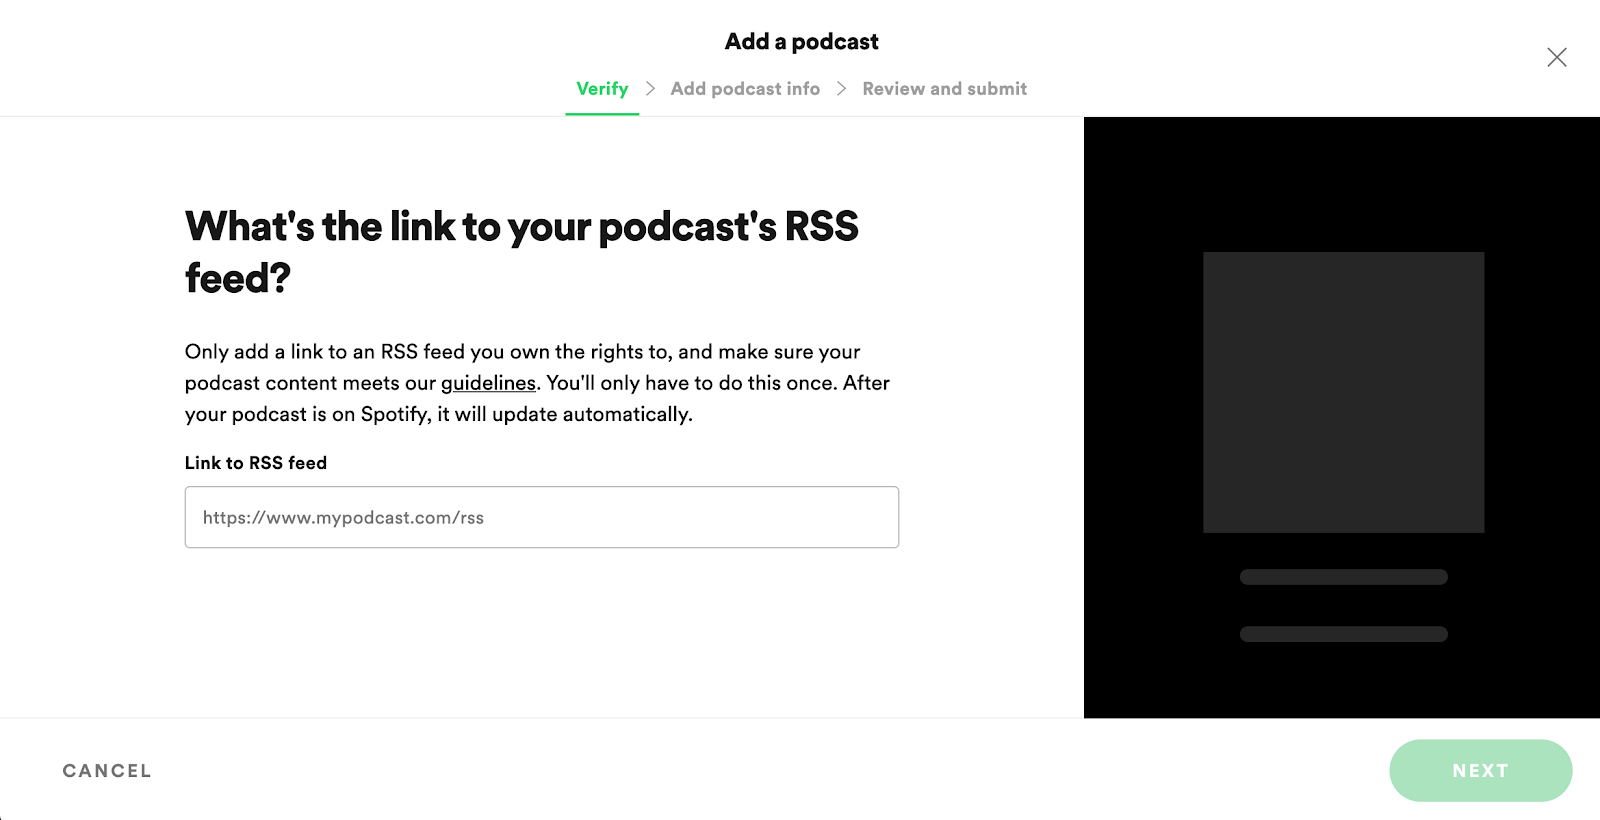 The webpage for uploading a podcast to Spotify with an RSS link